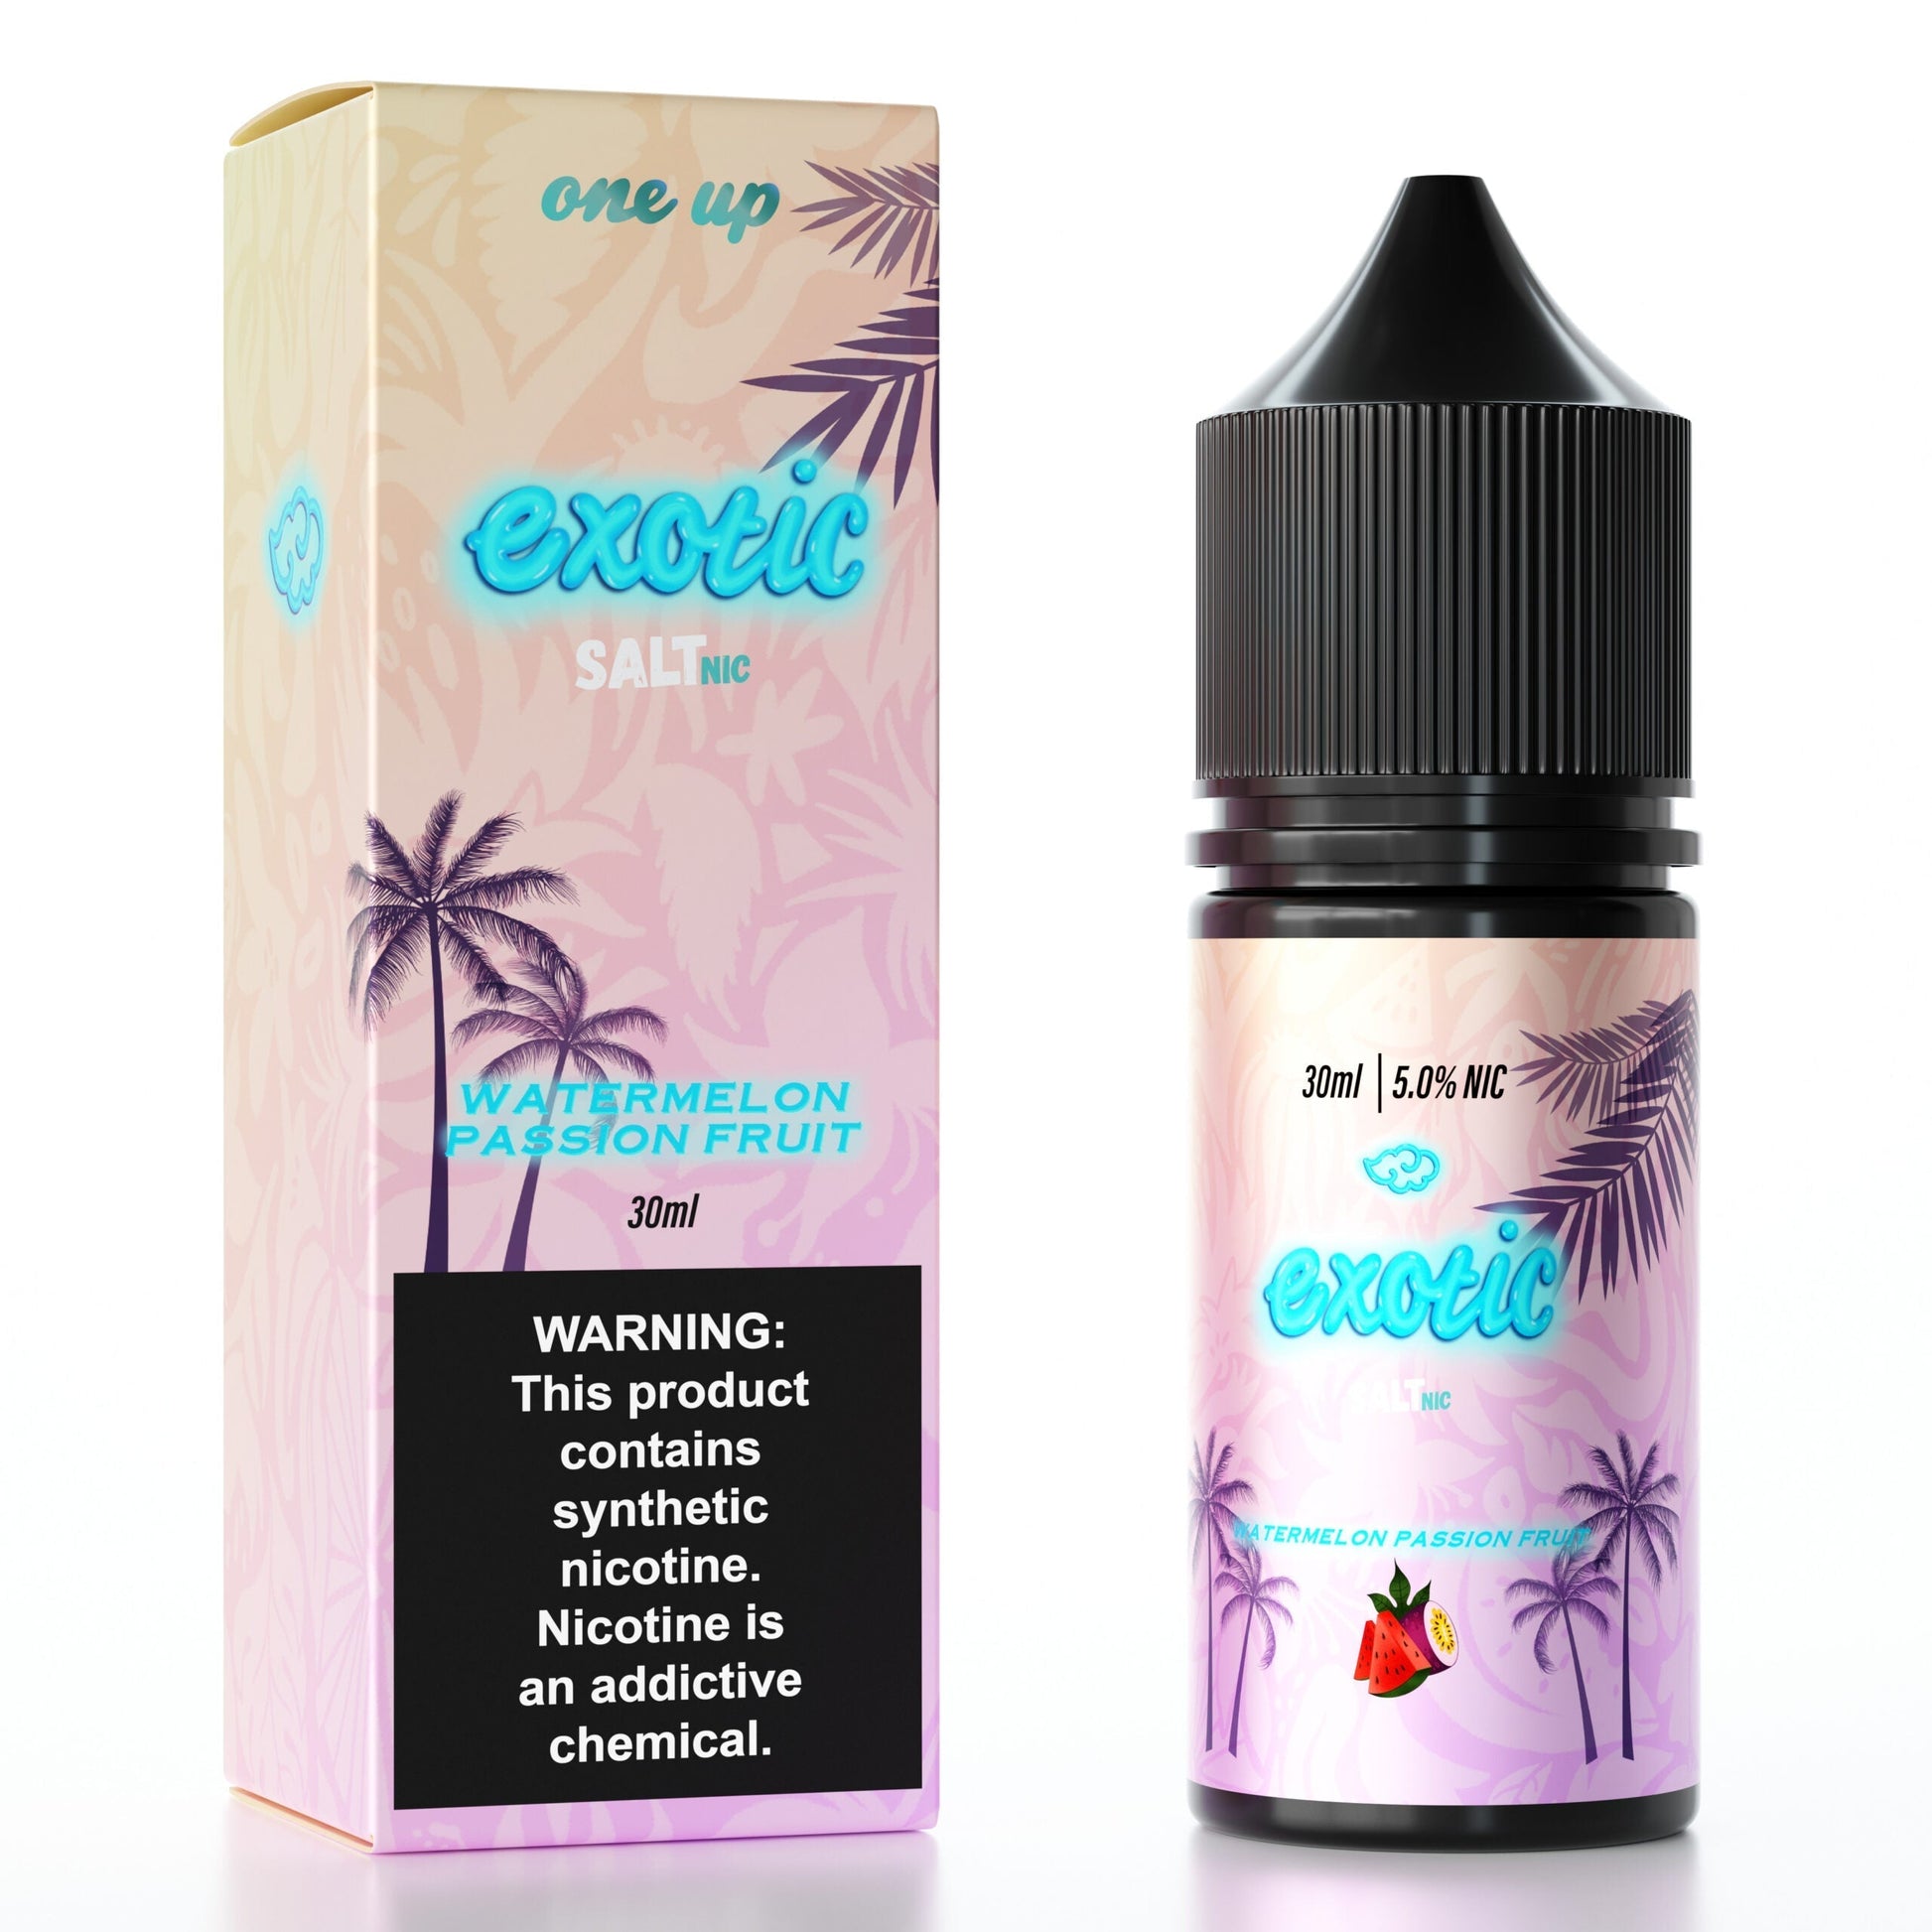 One Up TFN Salt Series E-Liquid 30mL (Salt Nic) | Watermelon Passion Fruit With Packaging